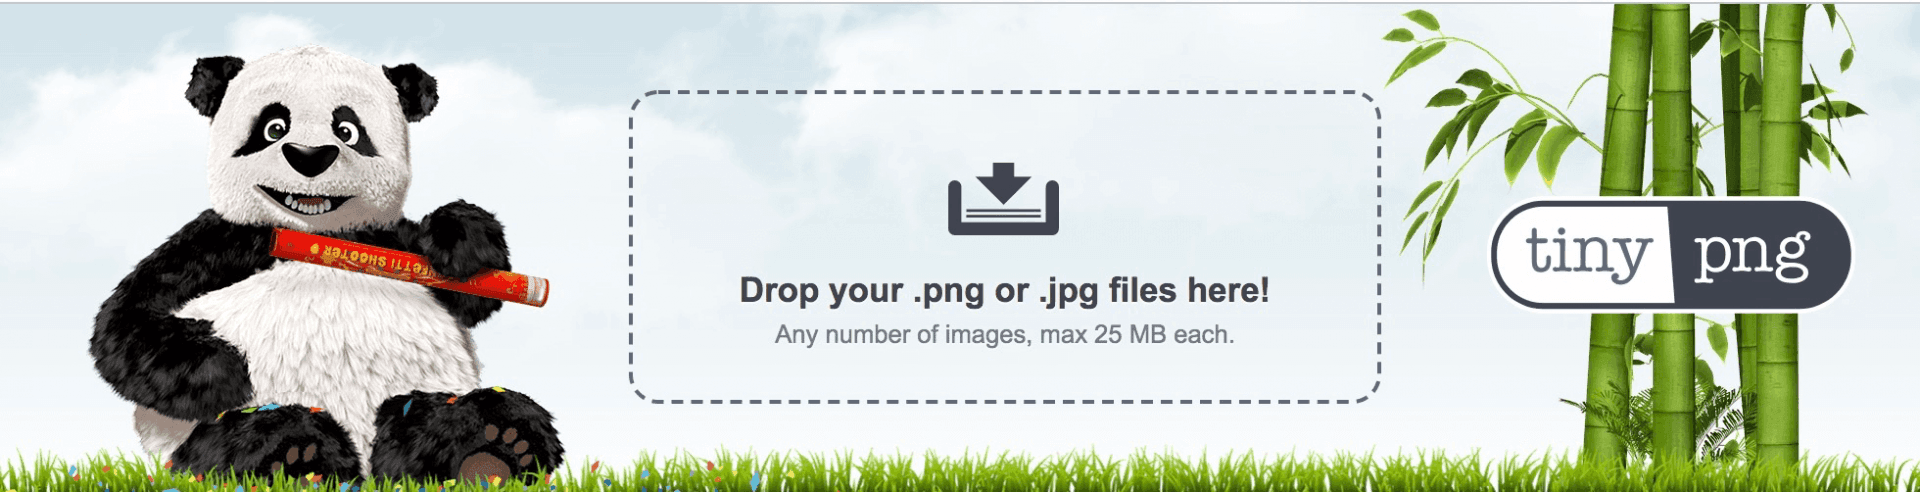 TinyPNG – Image Compression - Promotion and SEO